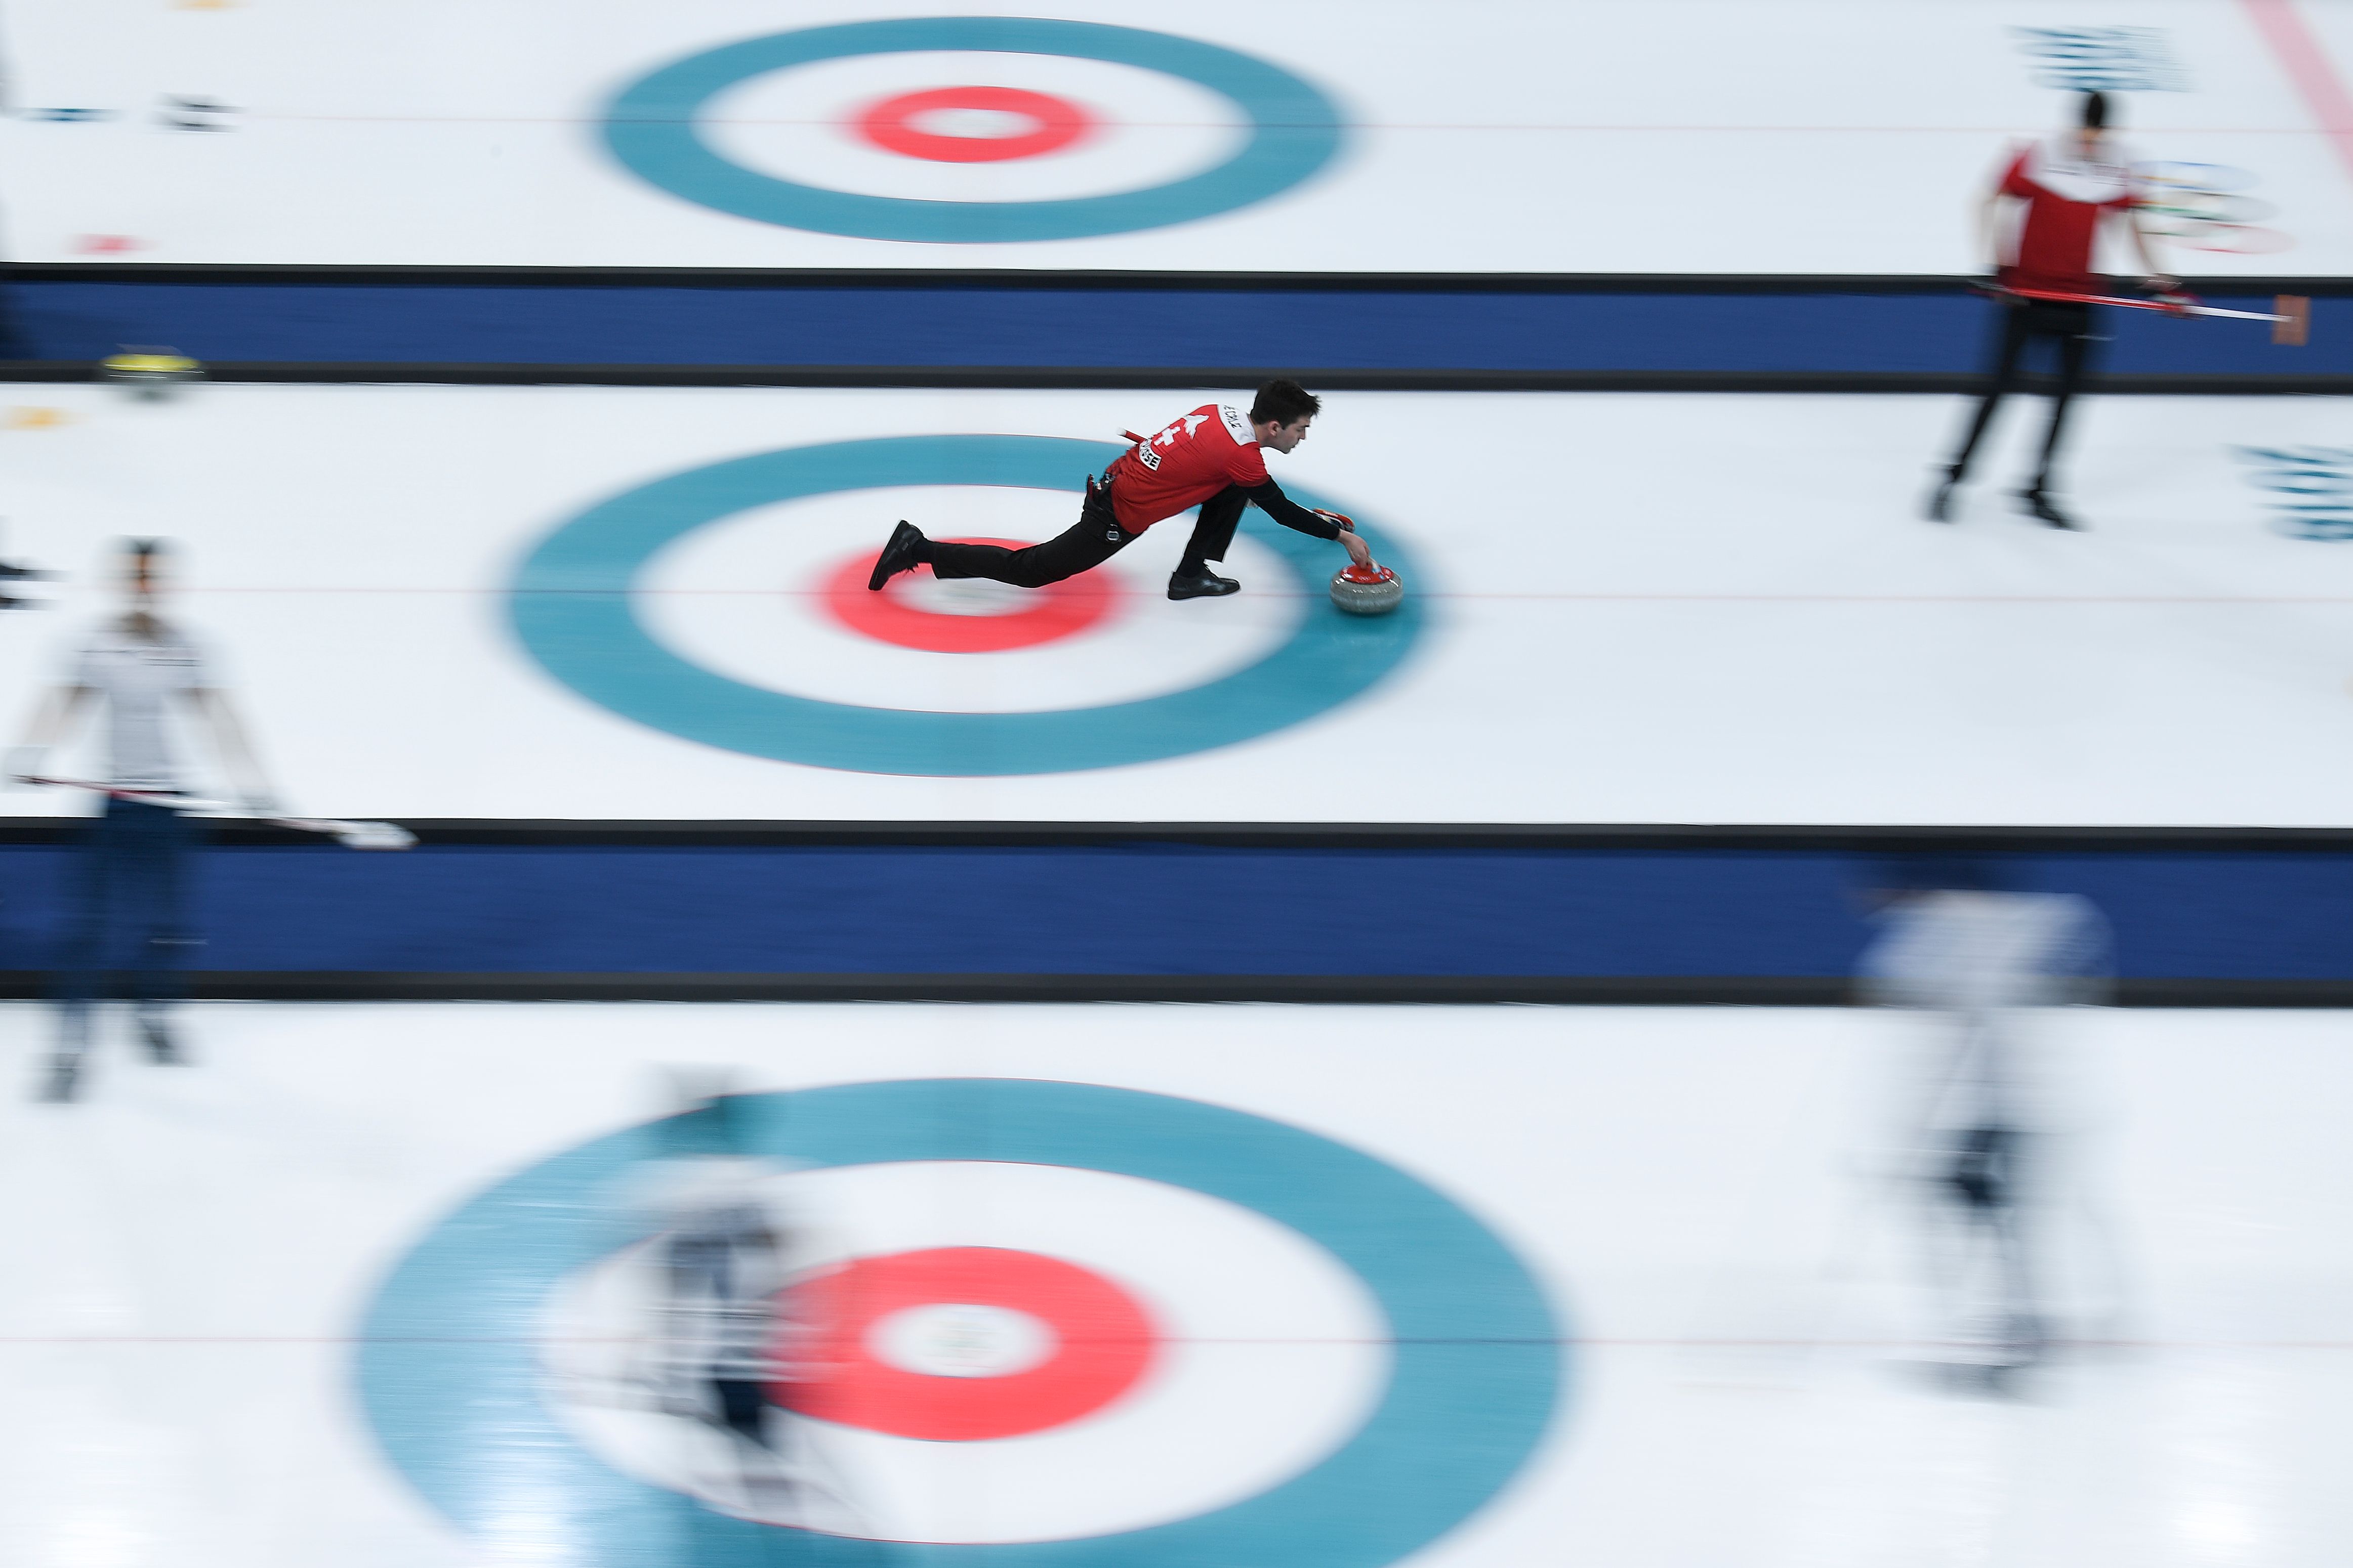 Switzerland's Peter De Cruz throws the stone during the curling men's round robin session between Switzerland and Italy during the Pyeongchang 2018 Winter Olympic Games at the Gangneung Curling Centre in Gangneung on February 14, 2018. (WANG ZHAO—AFP/Getty Images)